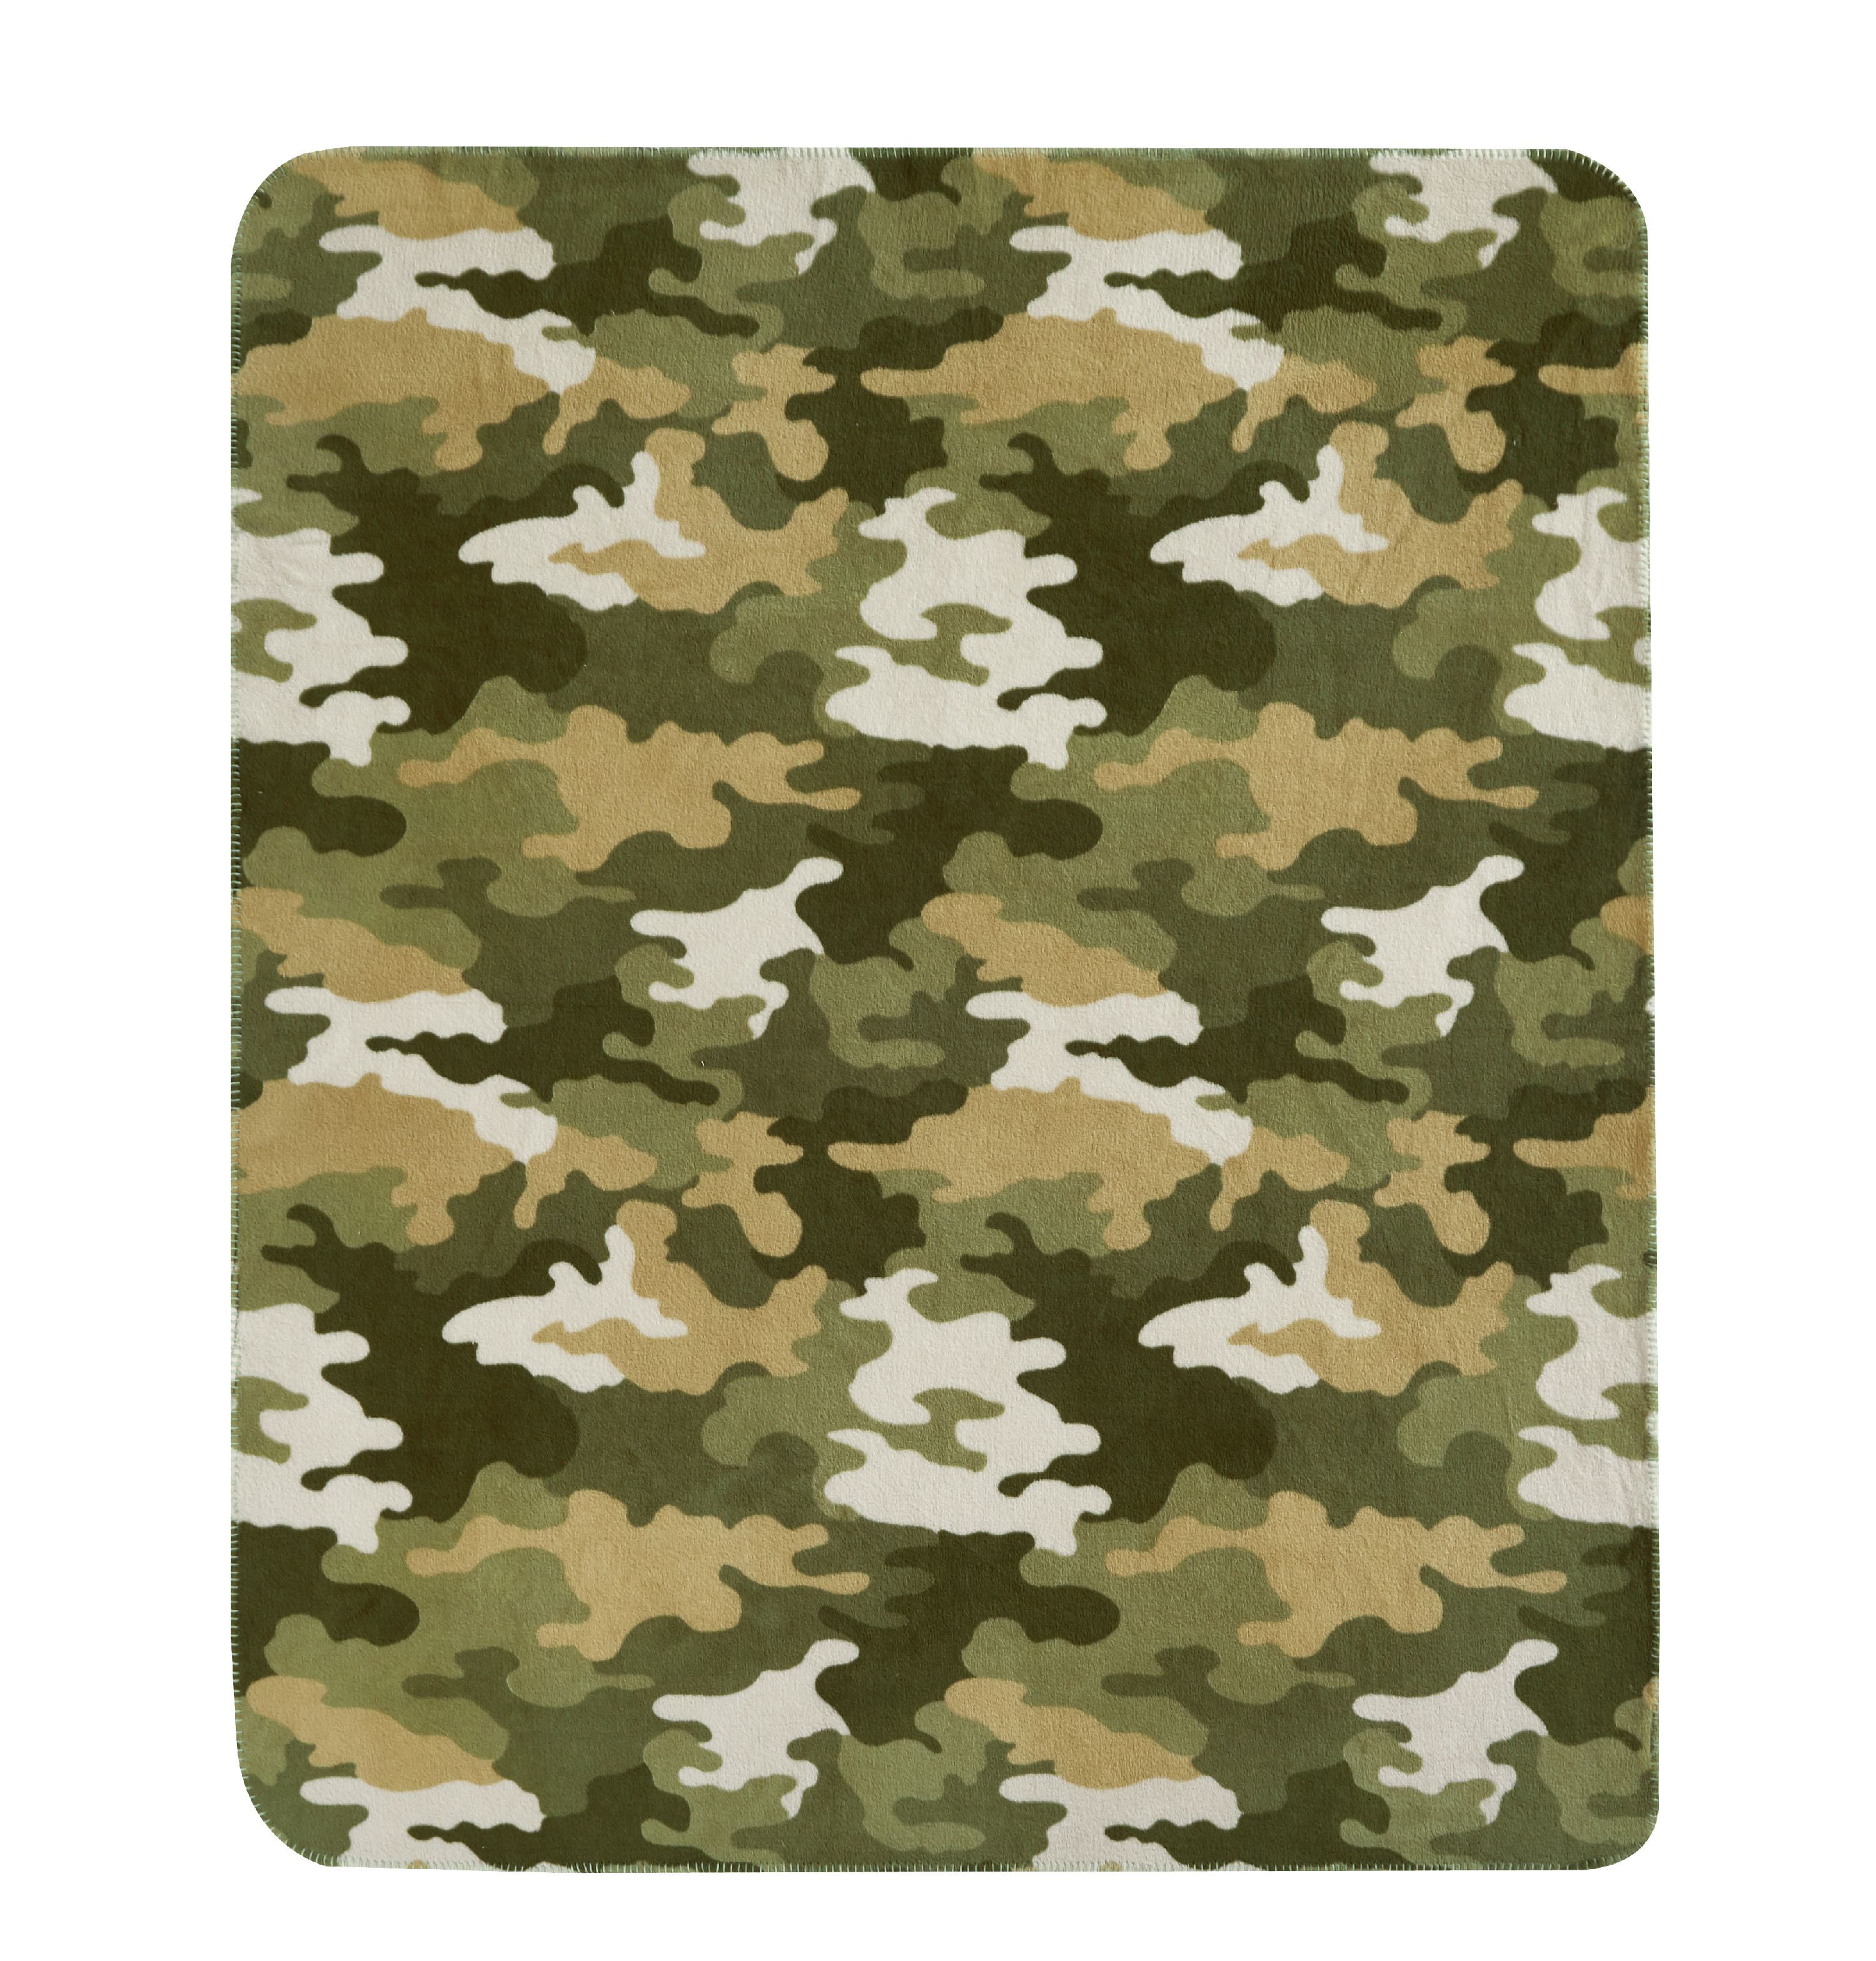 Details about   Green Army camouflage print ULTRA soft Cozy Plush Oversized Throw 50"x70" 